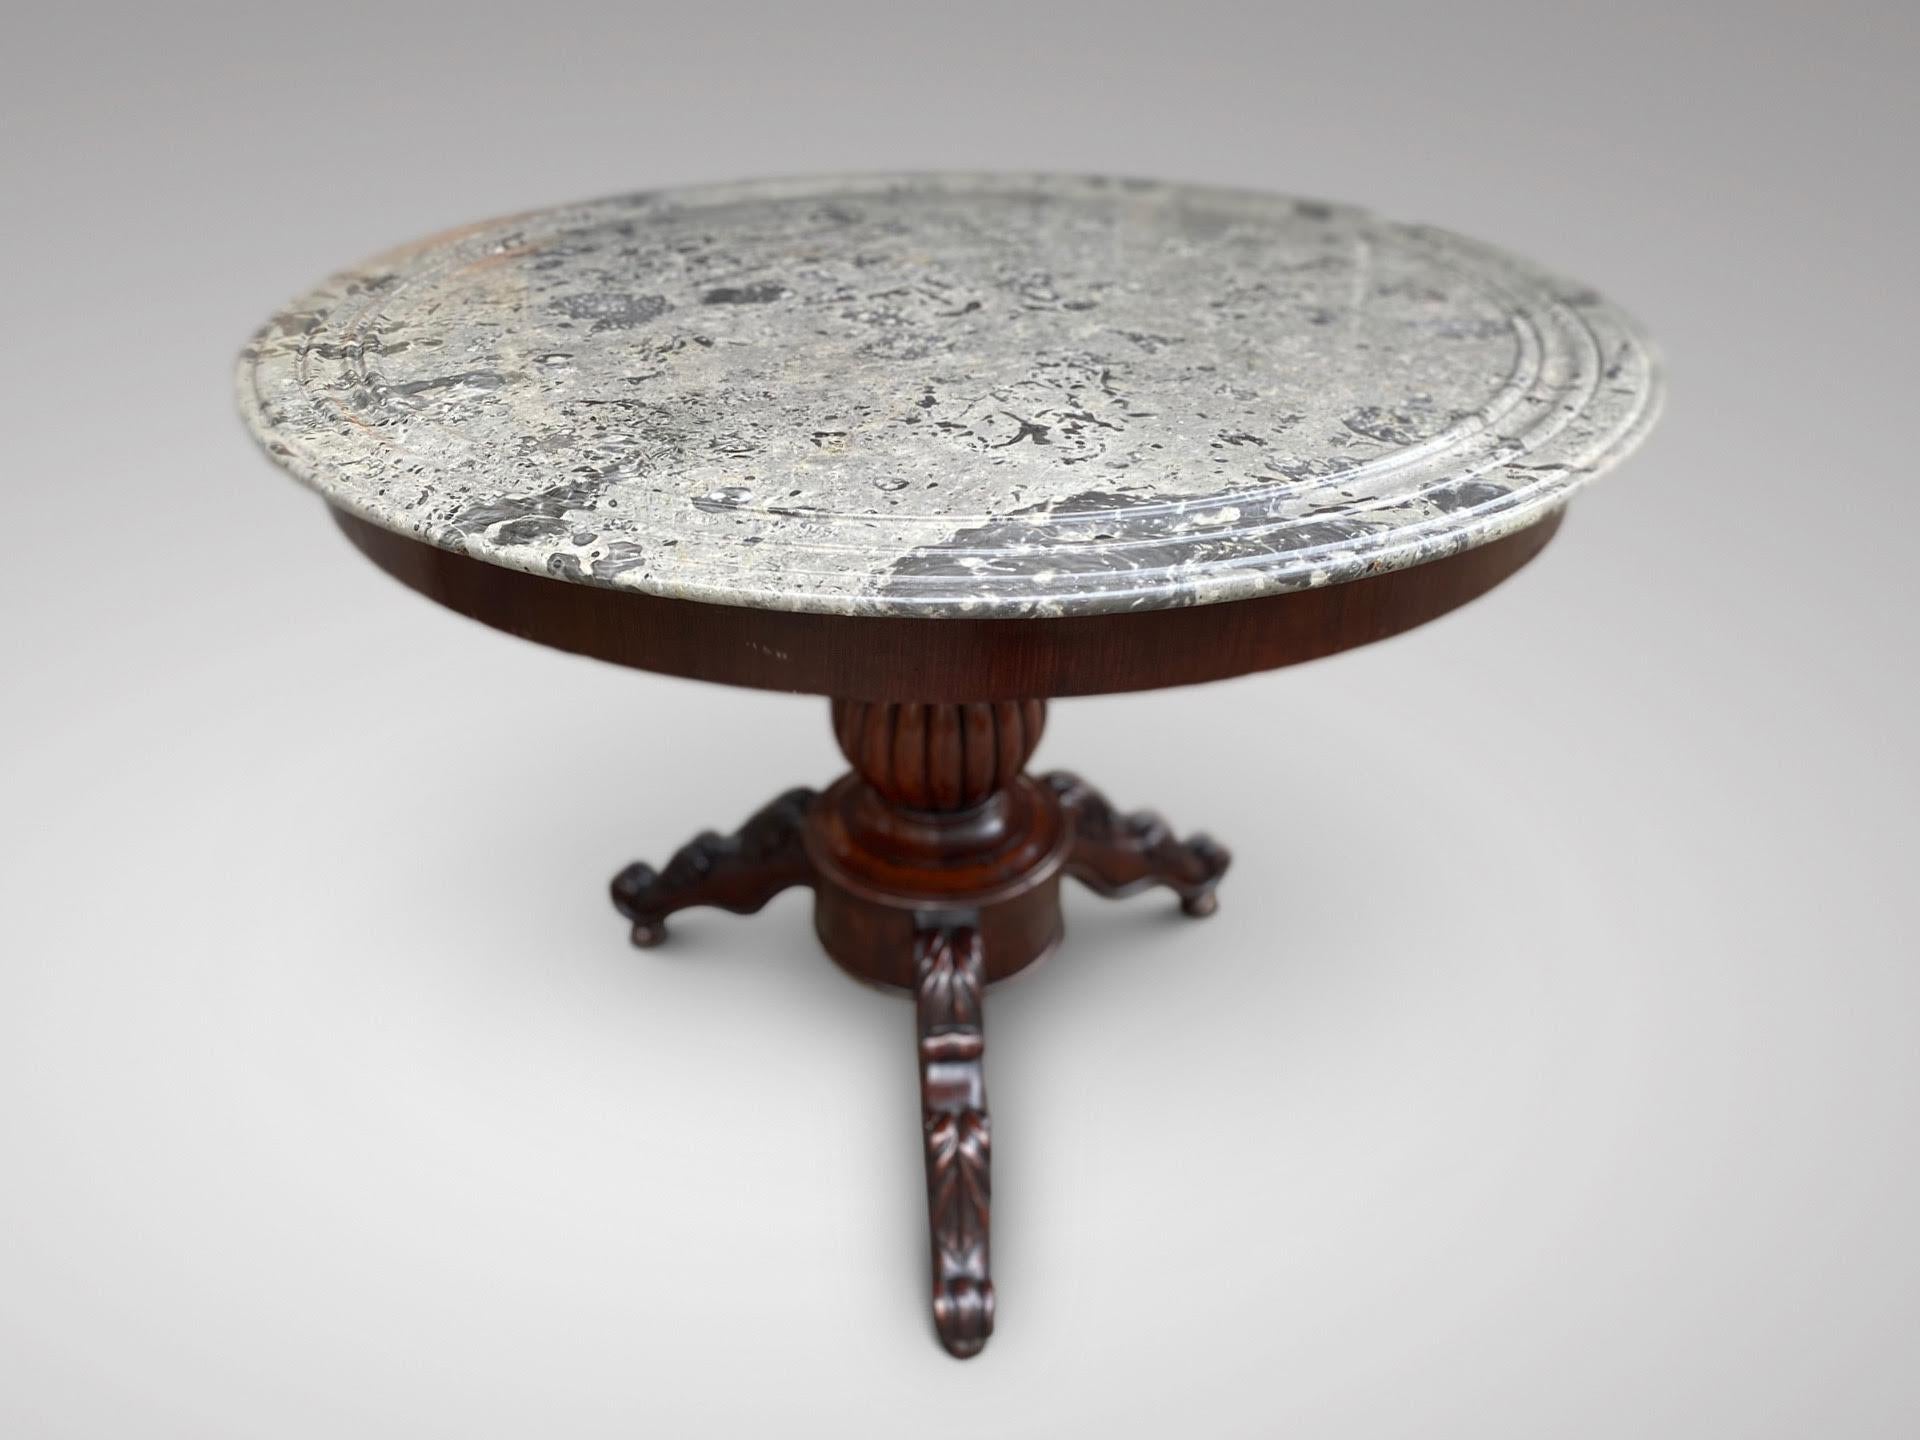 An attractive 19th century French mahogany circular guéridon marble top centre table. Perfect condition round marble top with moulded edge over a turned reeded baluster and raised on tripod base ending on carved legs and ball feet. An original and